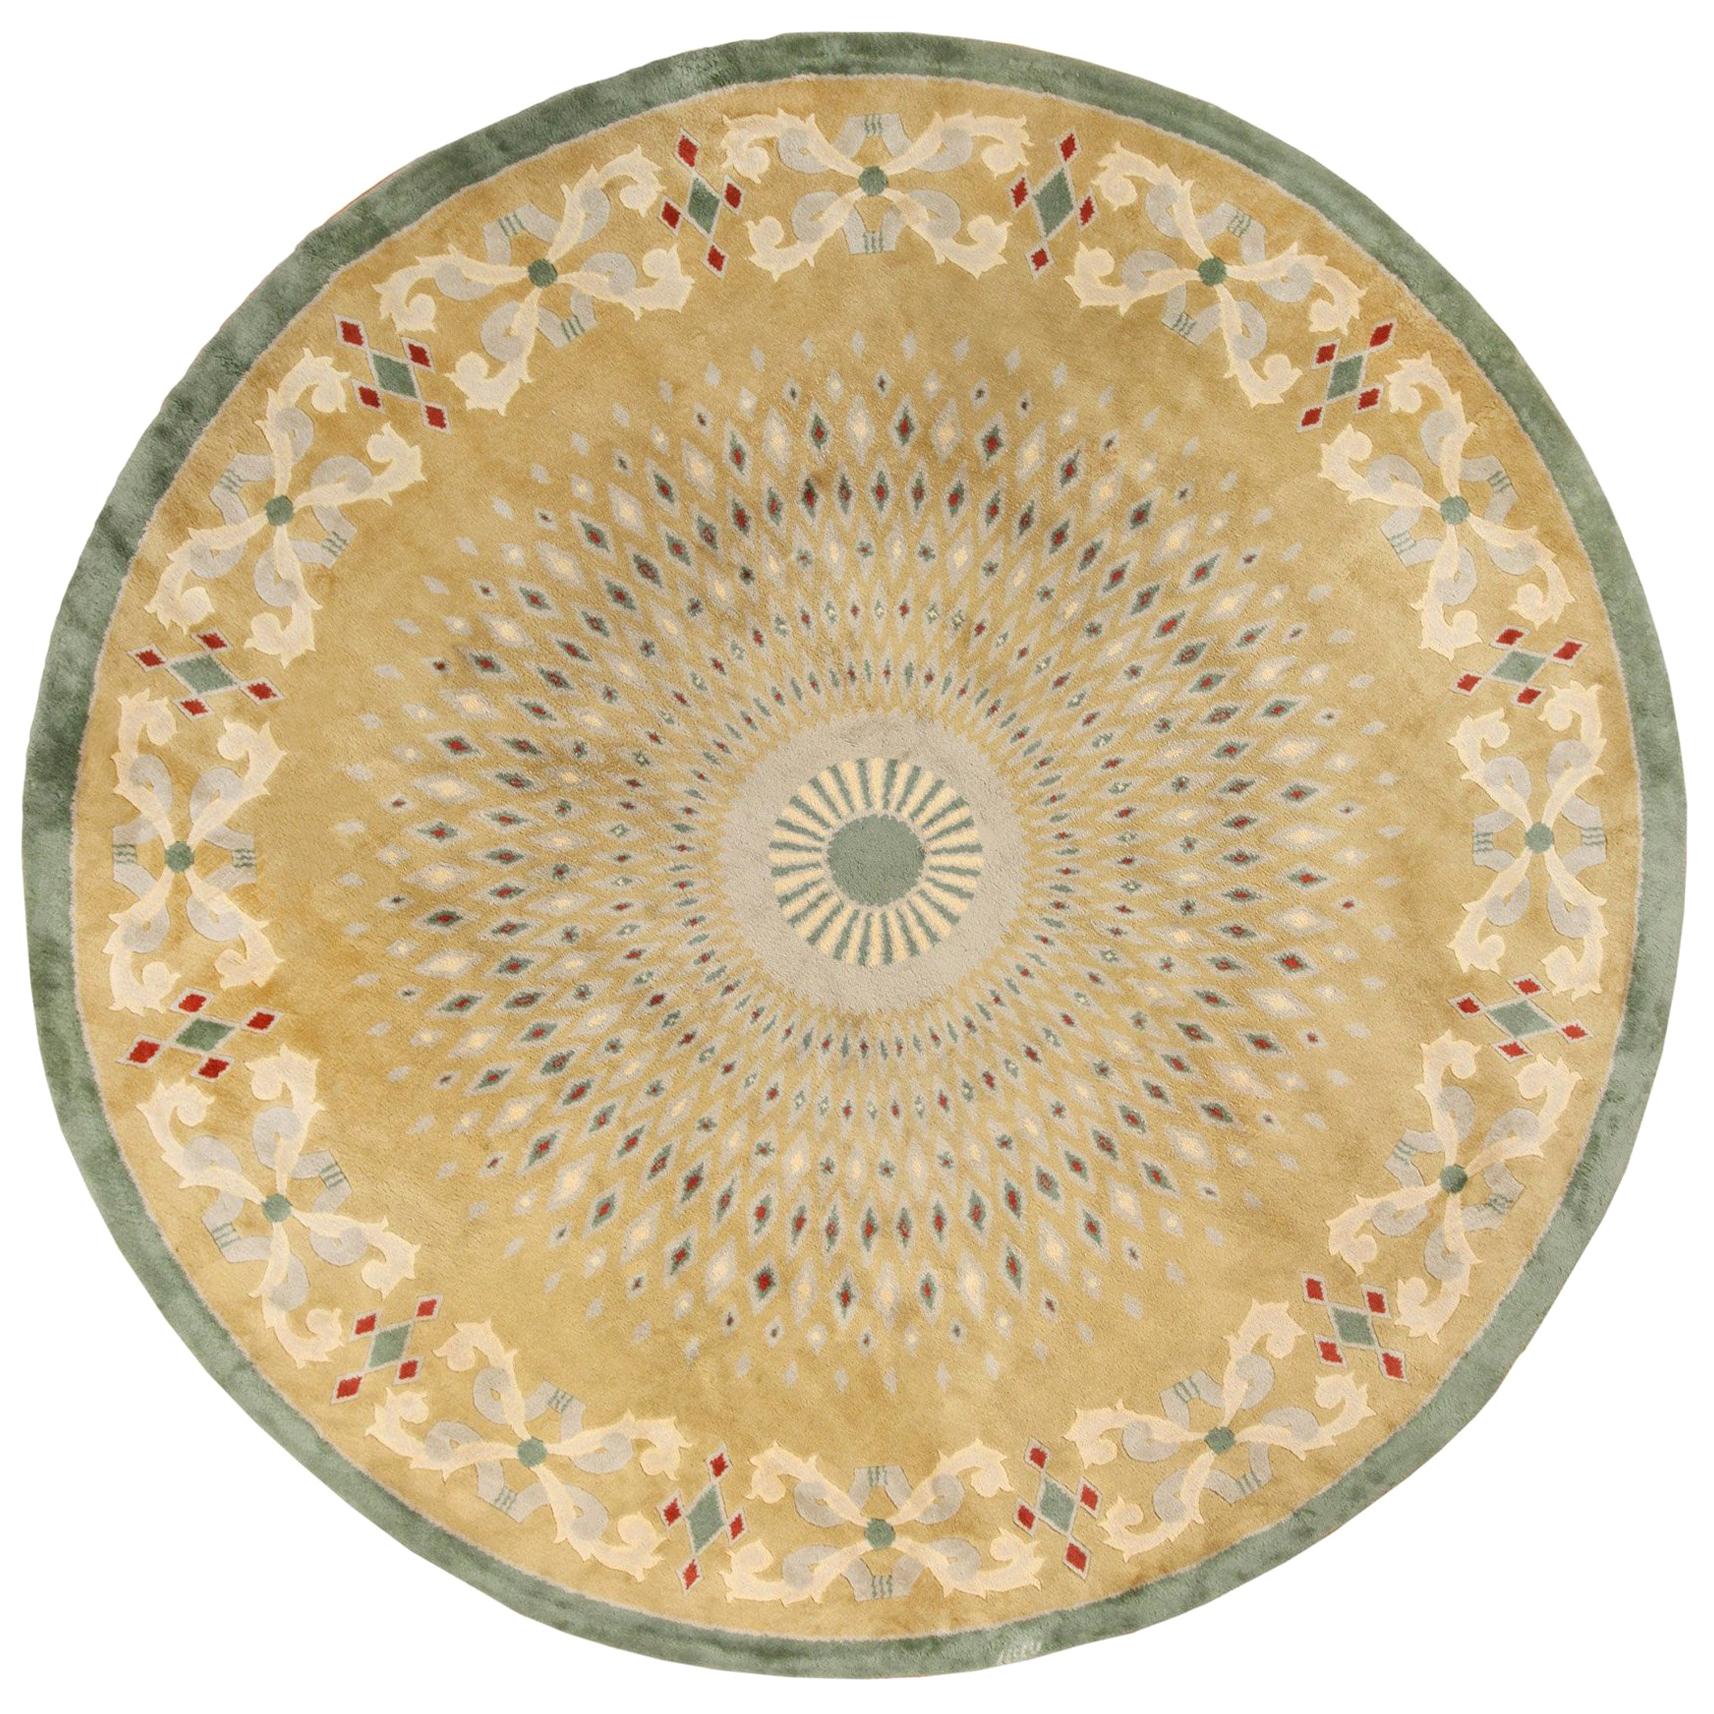 Antique Round French Art Deco Rug by Leleu. Size: 13 ft x 13 ft 